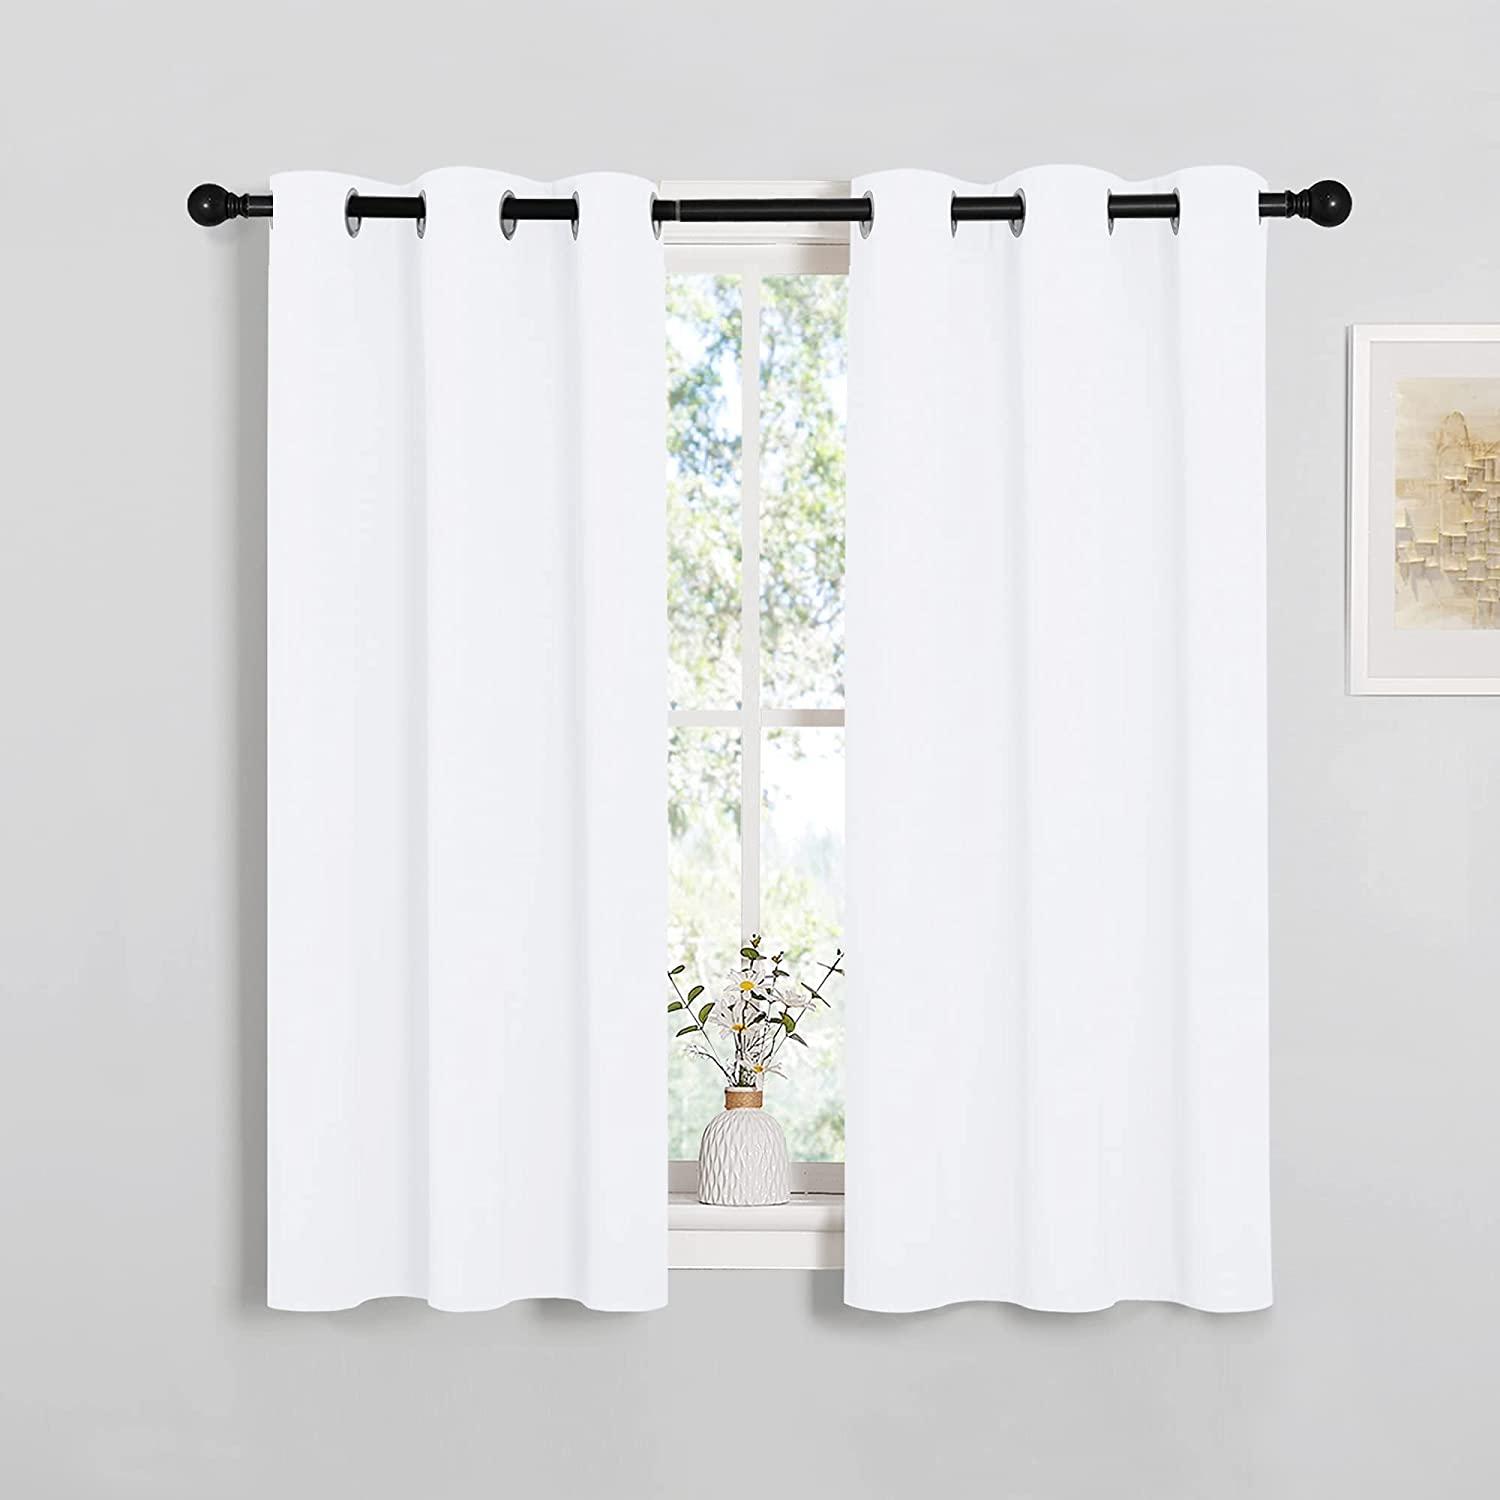 Draperies Curtains Panels Window Curtains for $17.56